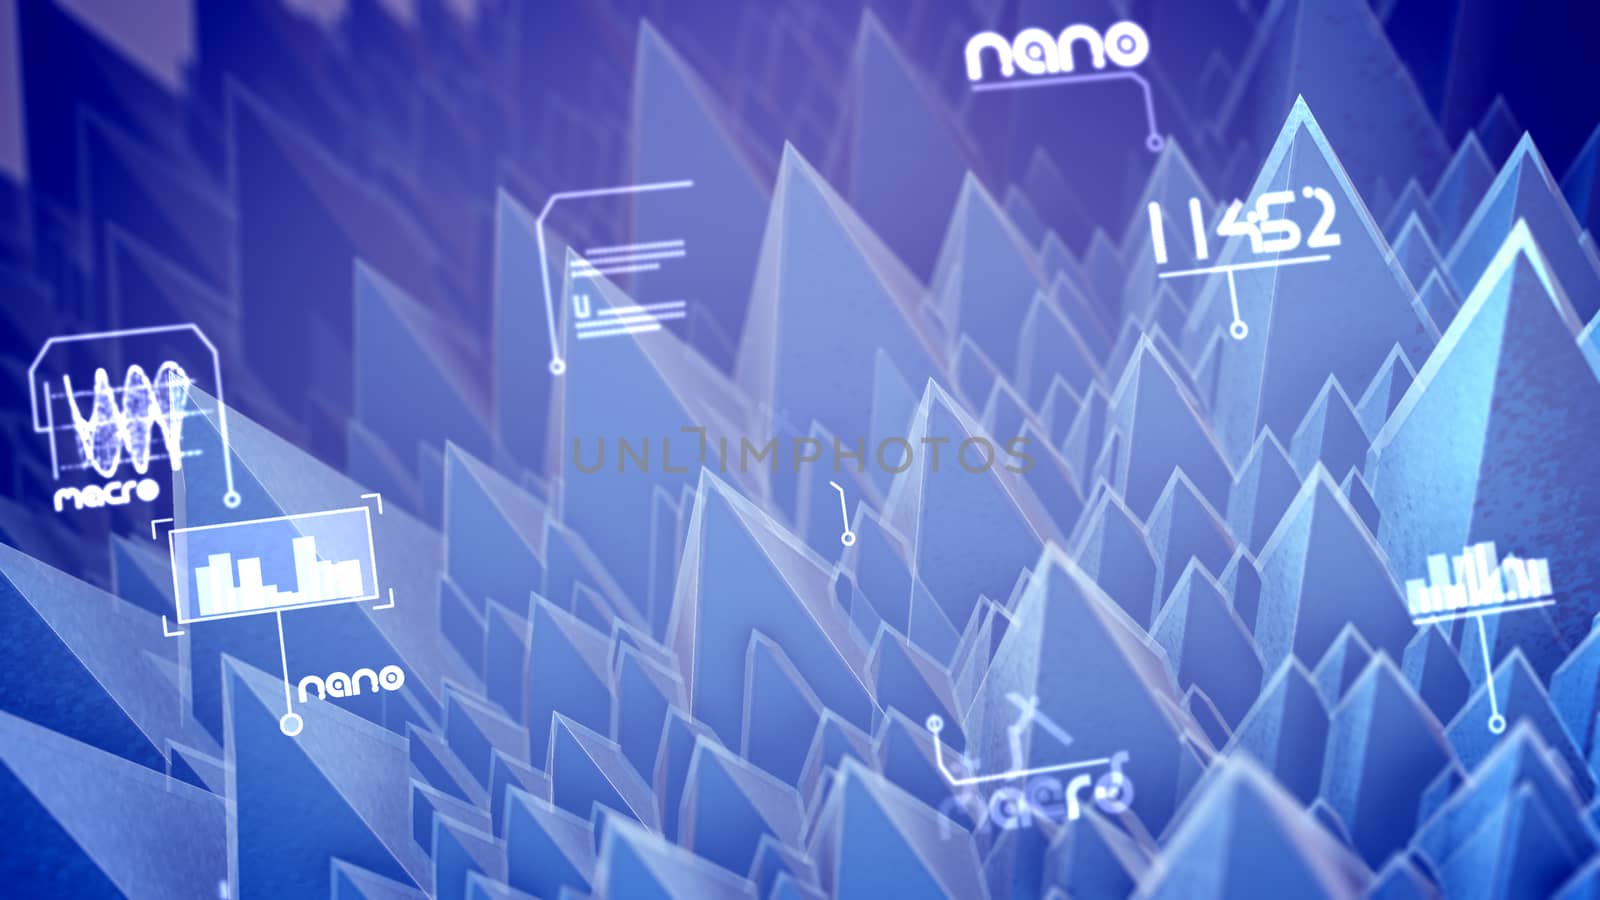 Artistic 3d illustration of nano pyramids with see-through slopes, spinning spirals and rushing digits in the light violet background. It looks innovative and futuristic